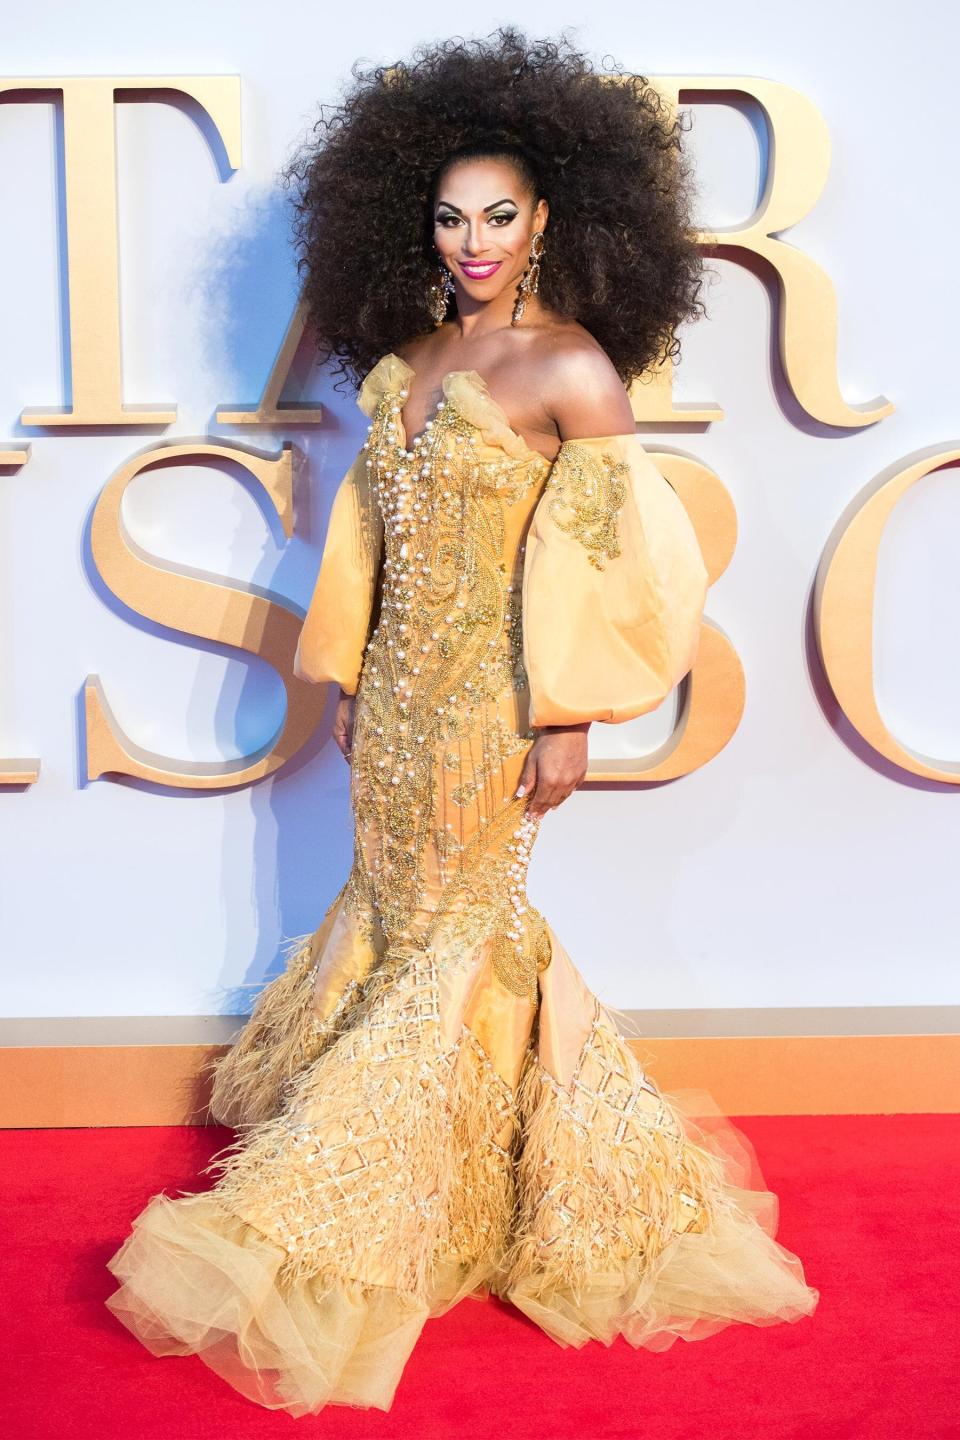 If you guessed <strong>Shangela</strong> — HALLELOO! You guessed right. This queen has proven that slow and steady wins the race. Although she never made it through to the crown, she can now say she's acted alongside Oscar winner Lady Gaga in <em>A Star Is Born</em>.